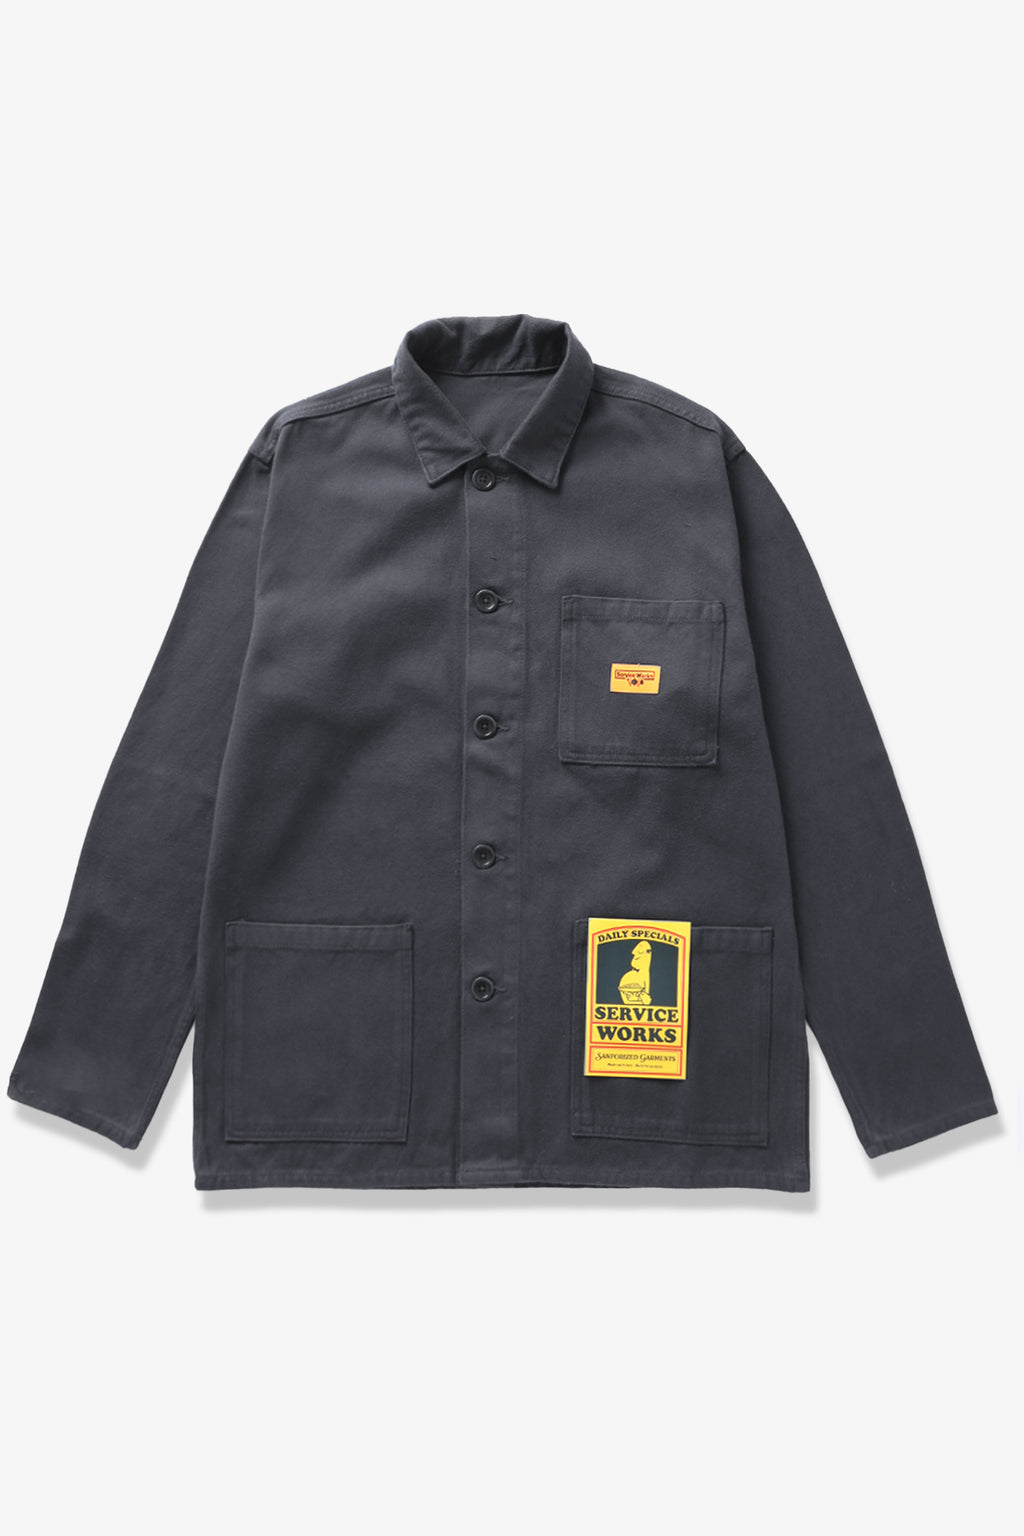 Service Works - Moleskin Coverall Jacket - Grey